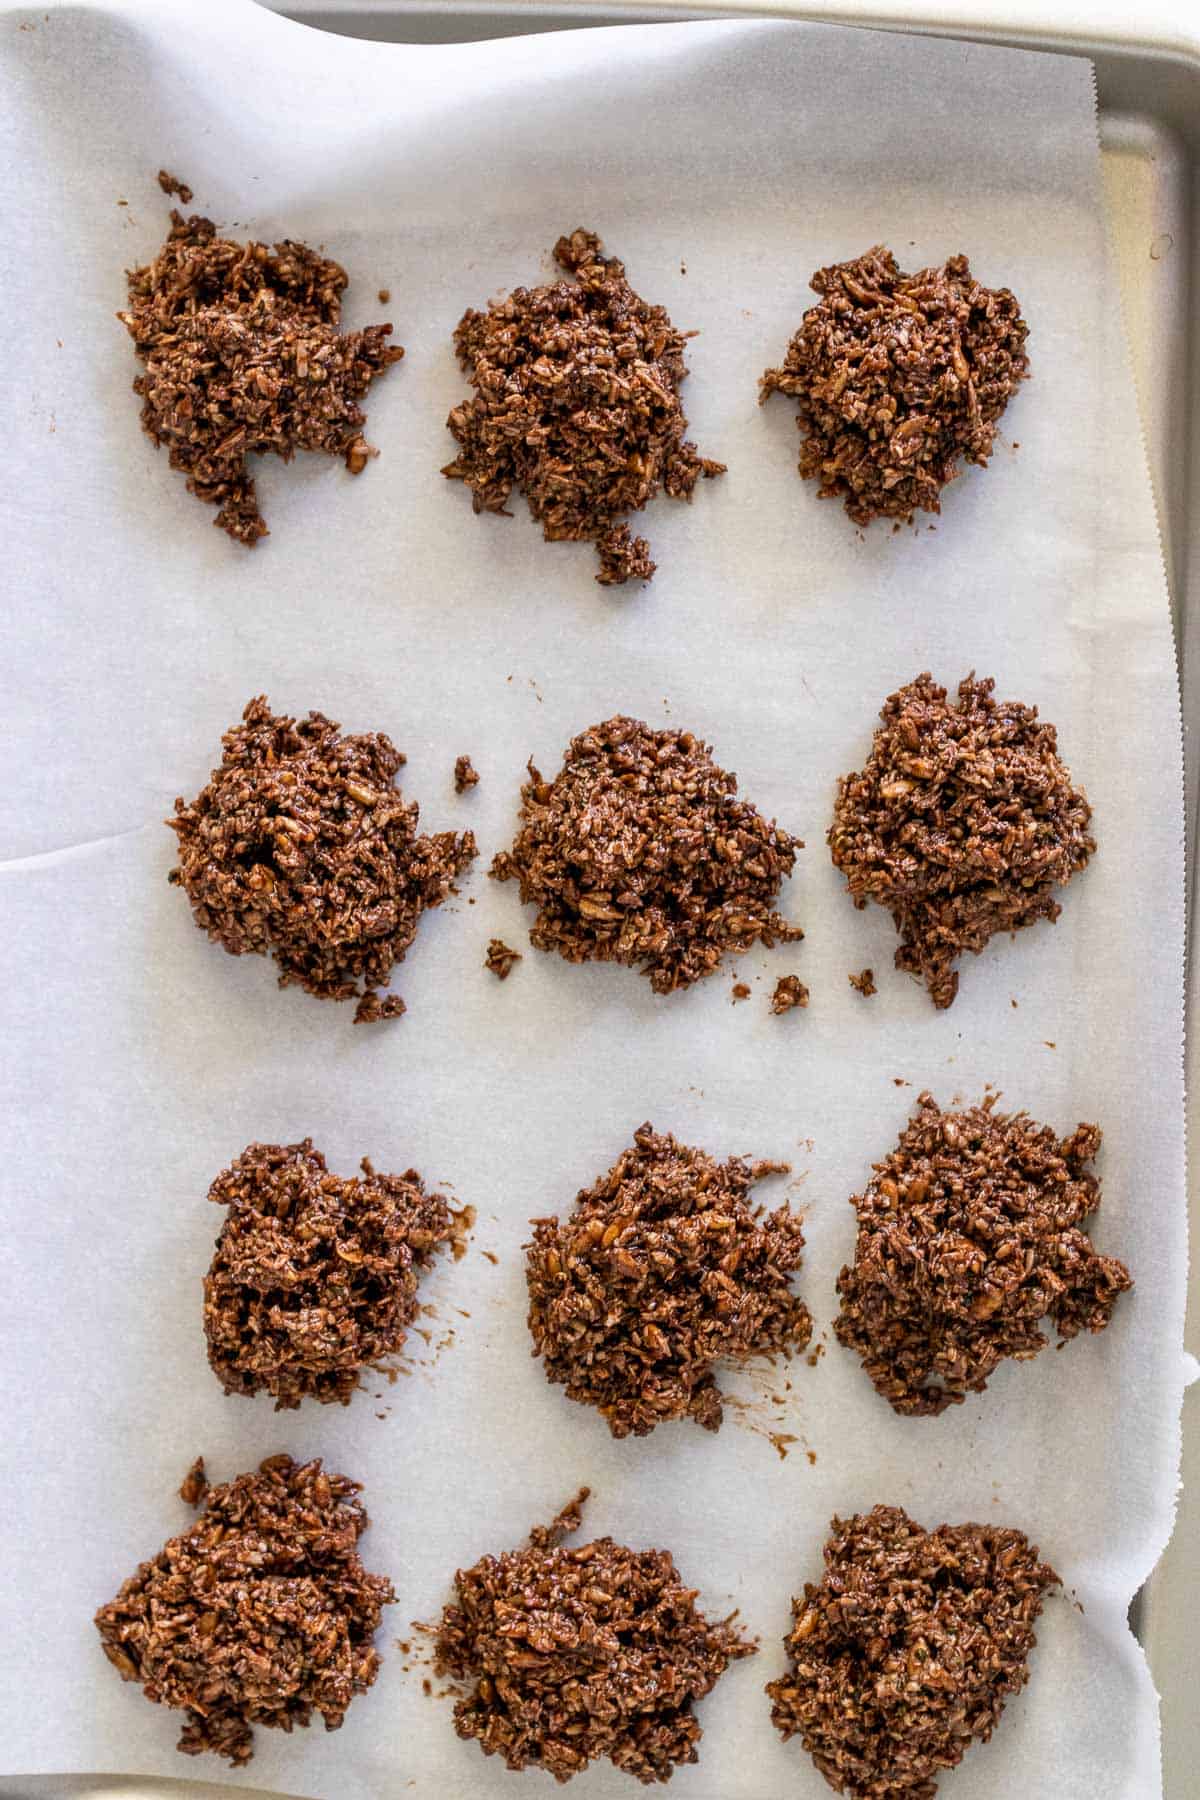 Mixture formed into 12 cookies on a baking tray lined with parchment paper, as seen from above